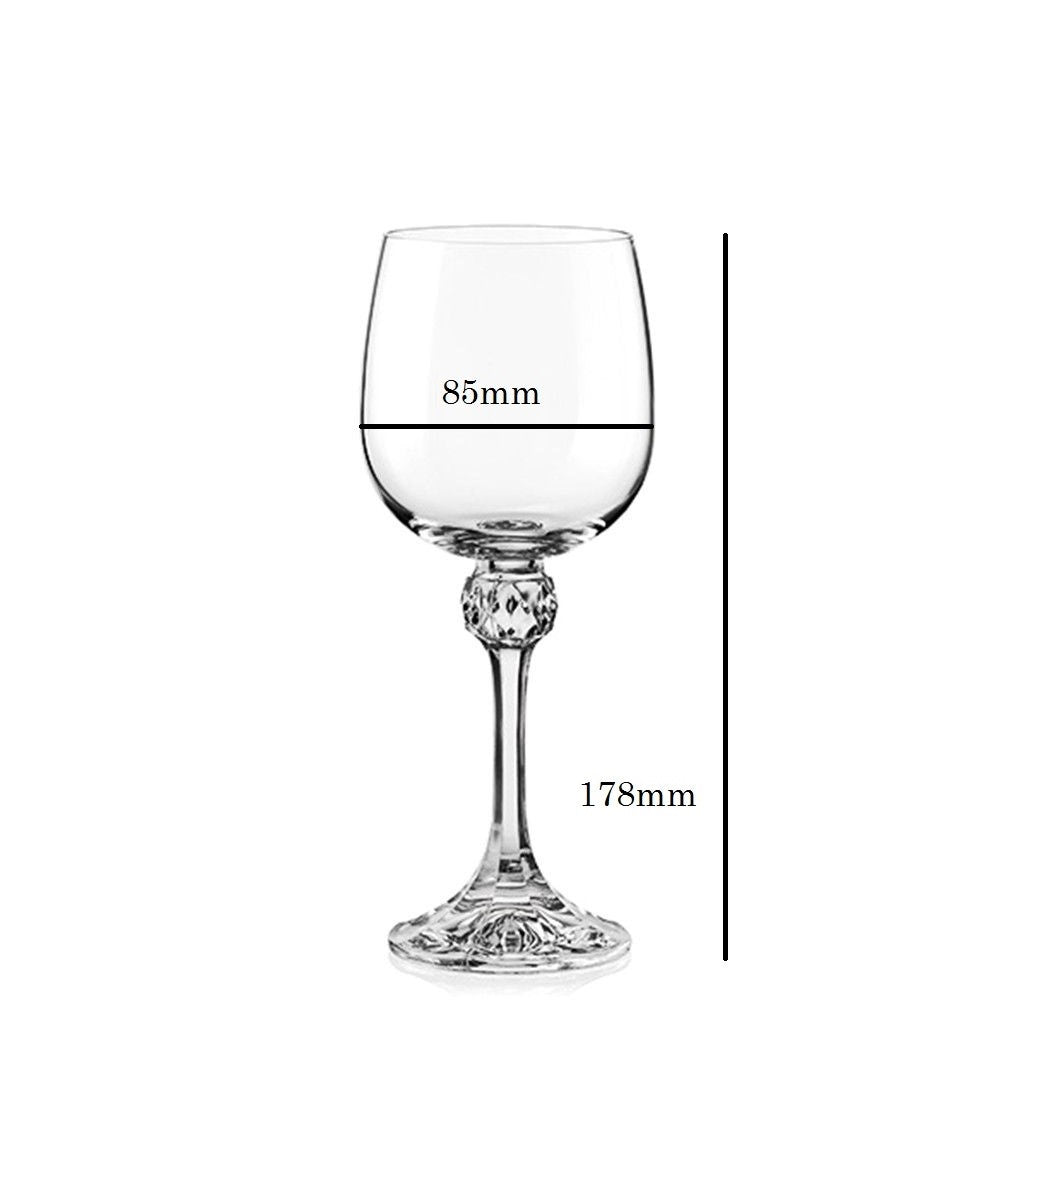 Dimensions of Refined wine glass ideal for casual and formal settings